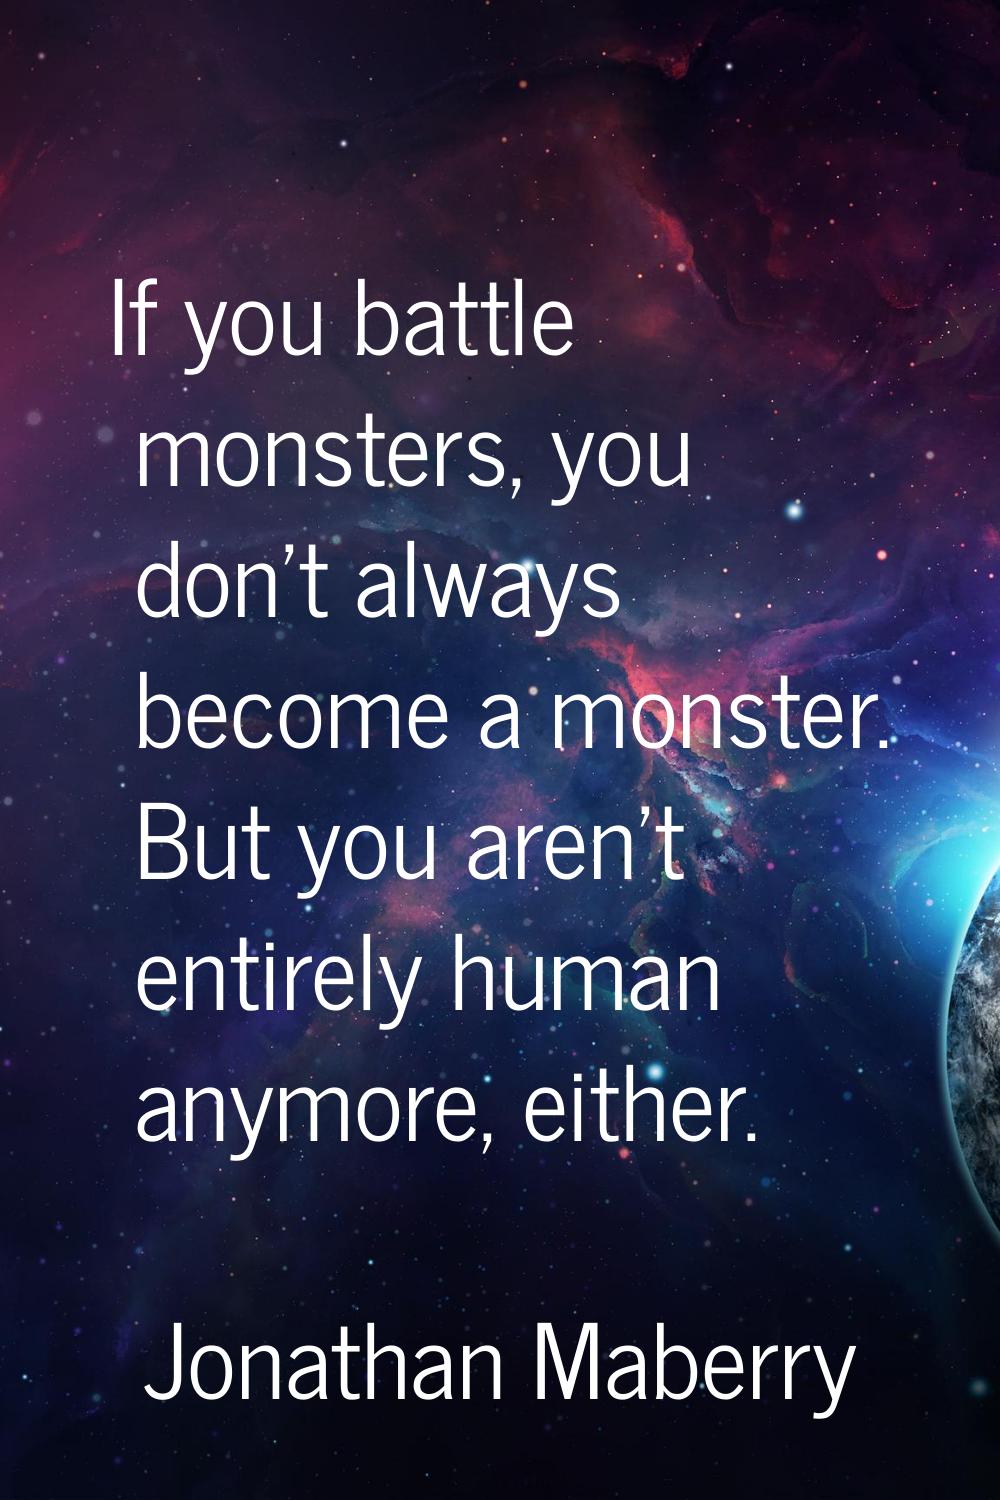 If you battle monsters, you don't always become a monster. But you aren't entirely human anymore, e